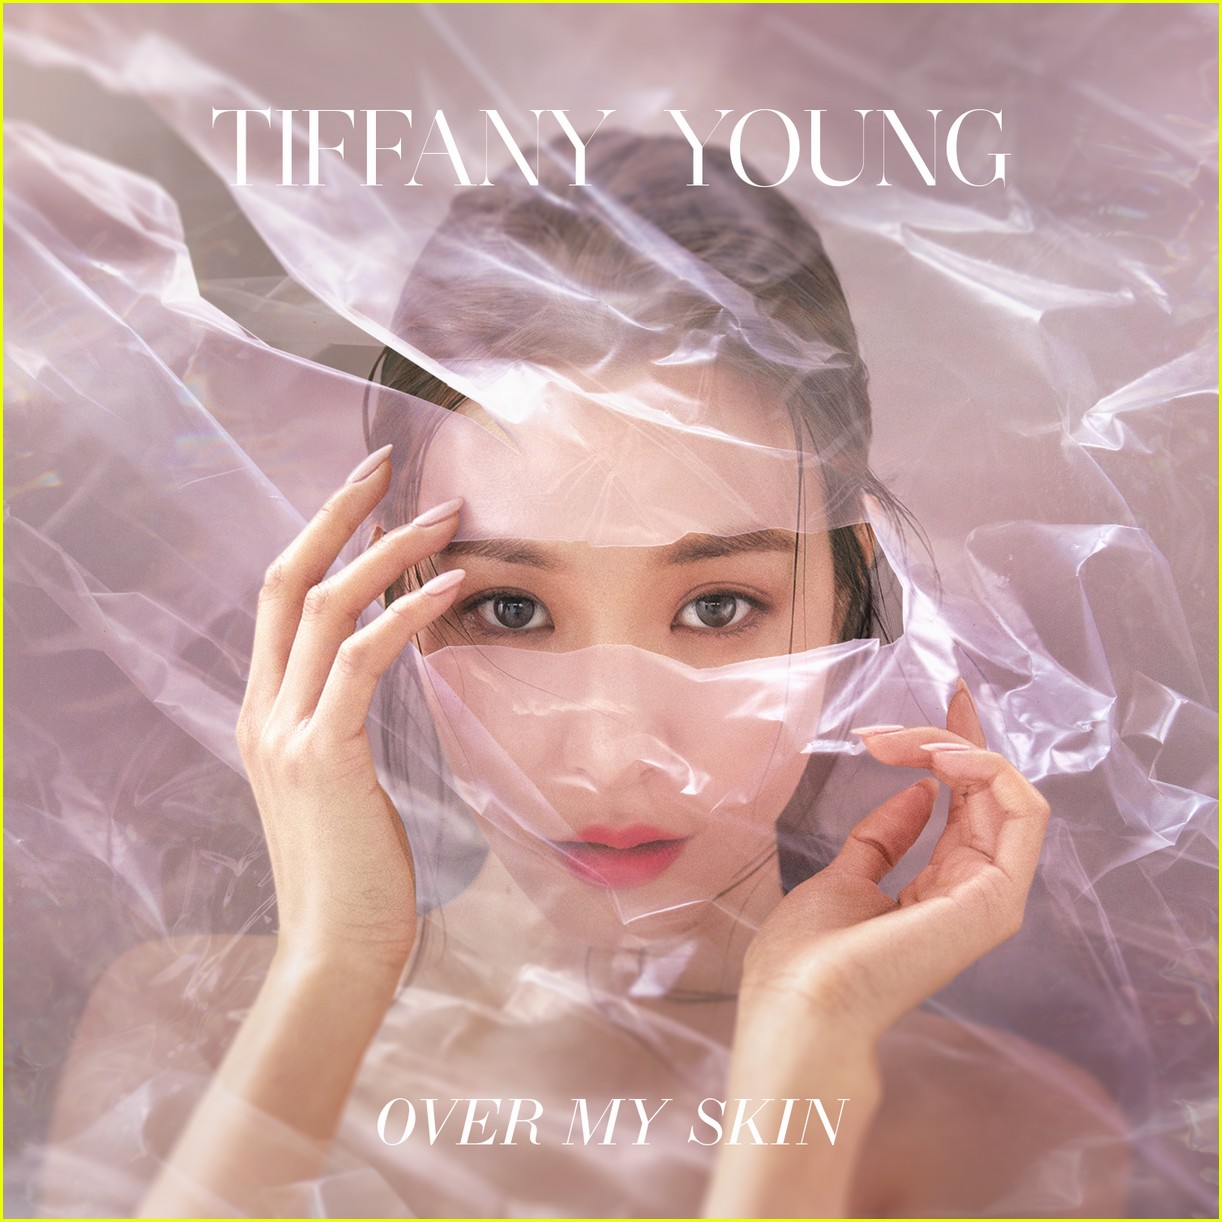 tiffany young 10 fun facts 014123726